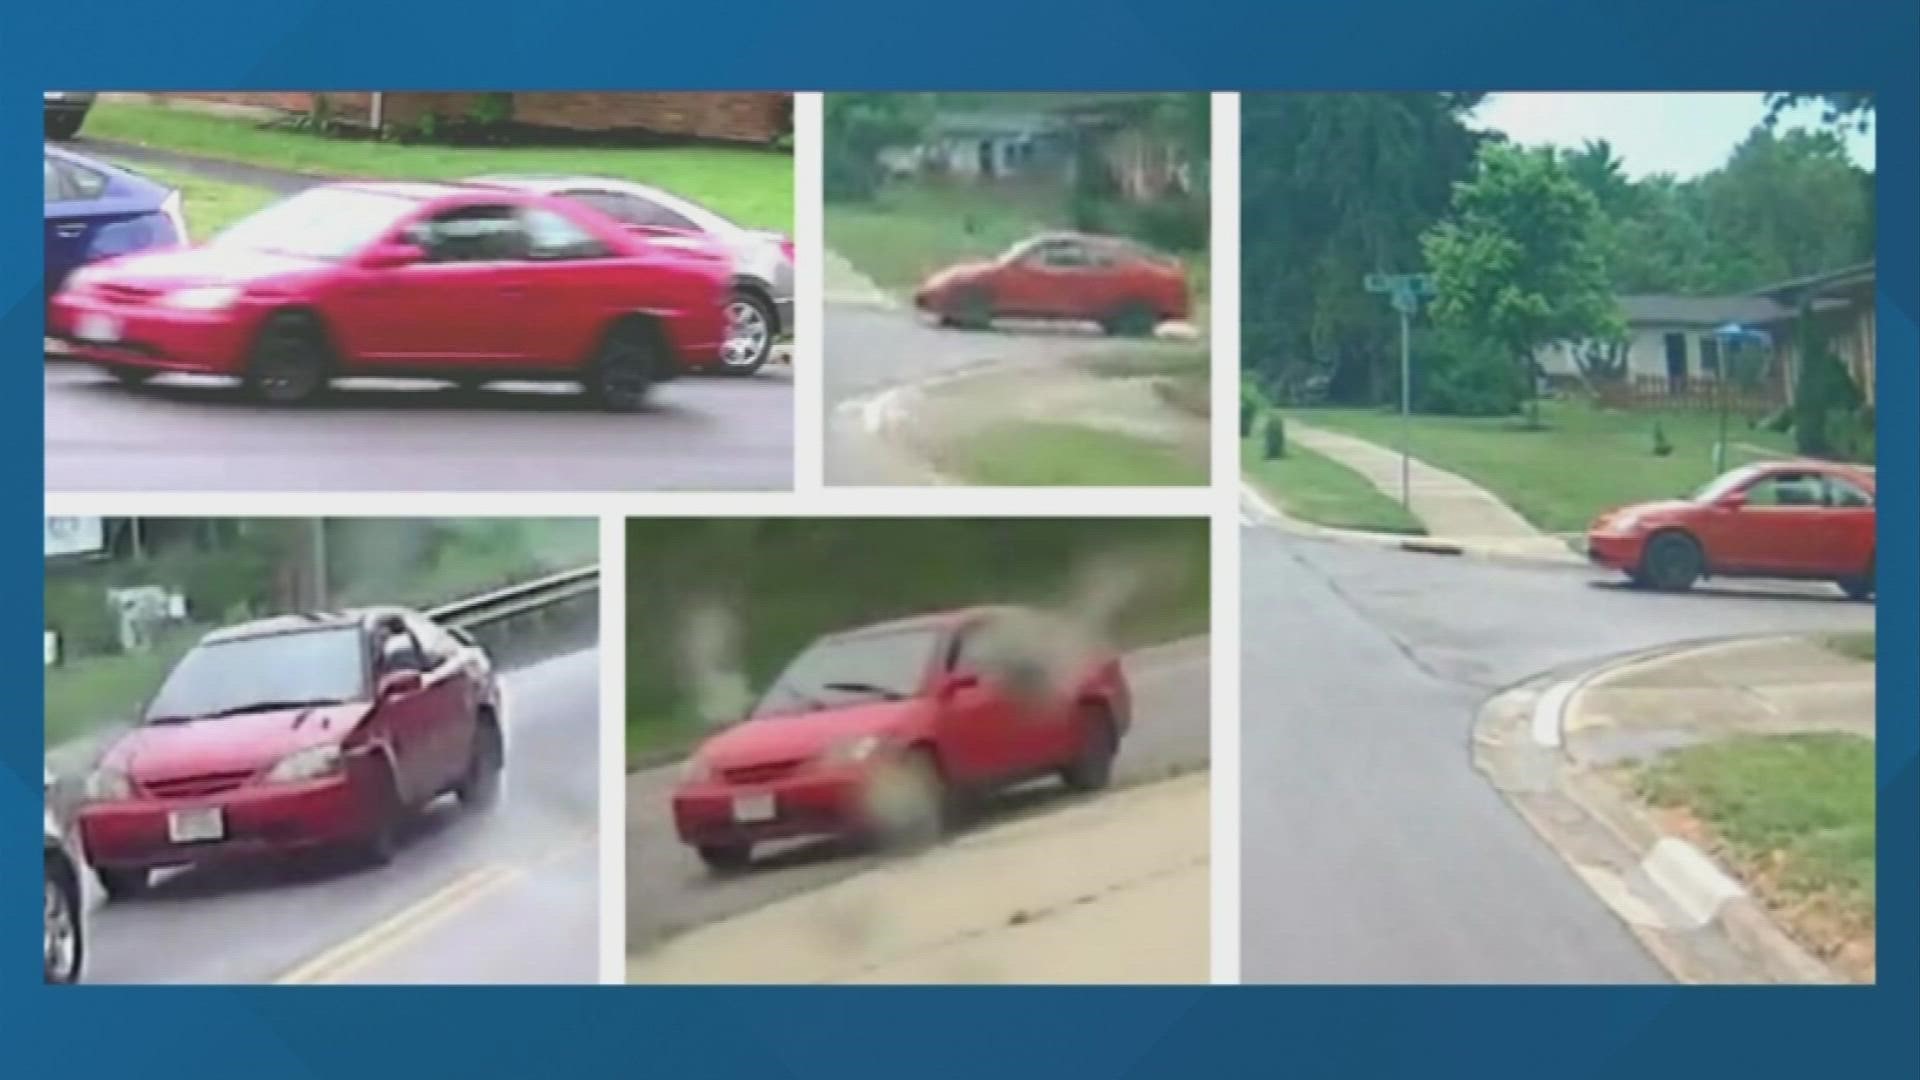 Police are asking for information about a red Honda Civic in connection to the death of Robert Goodrich.